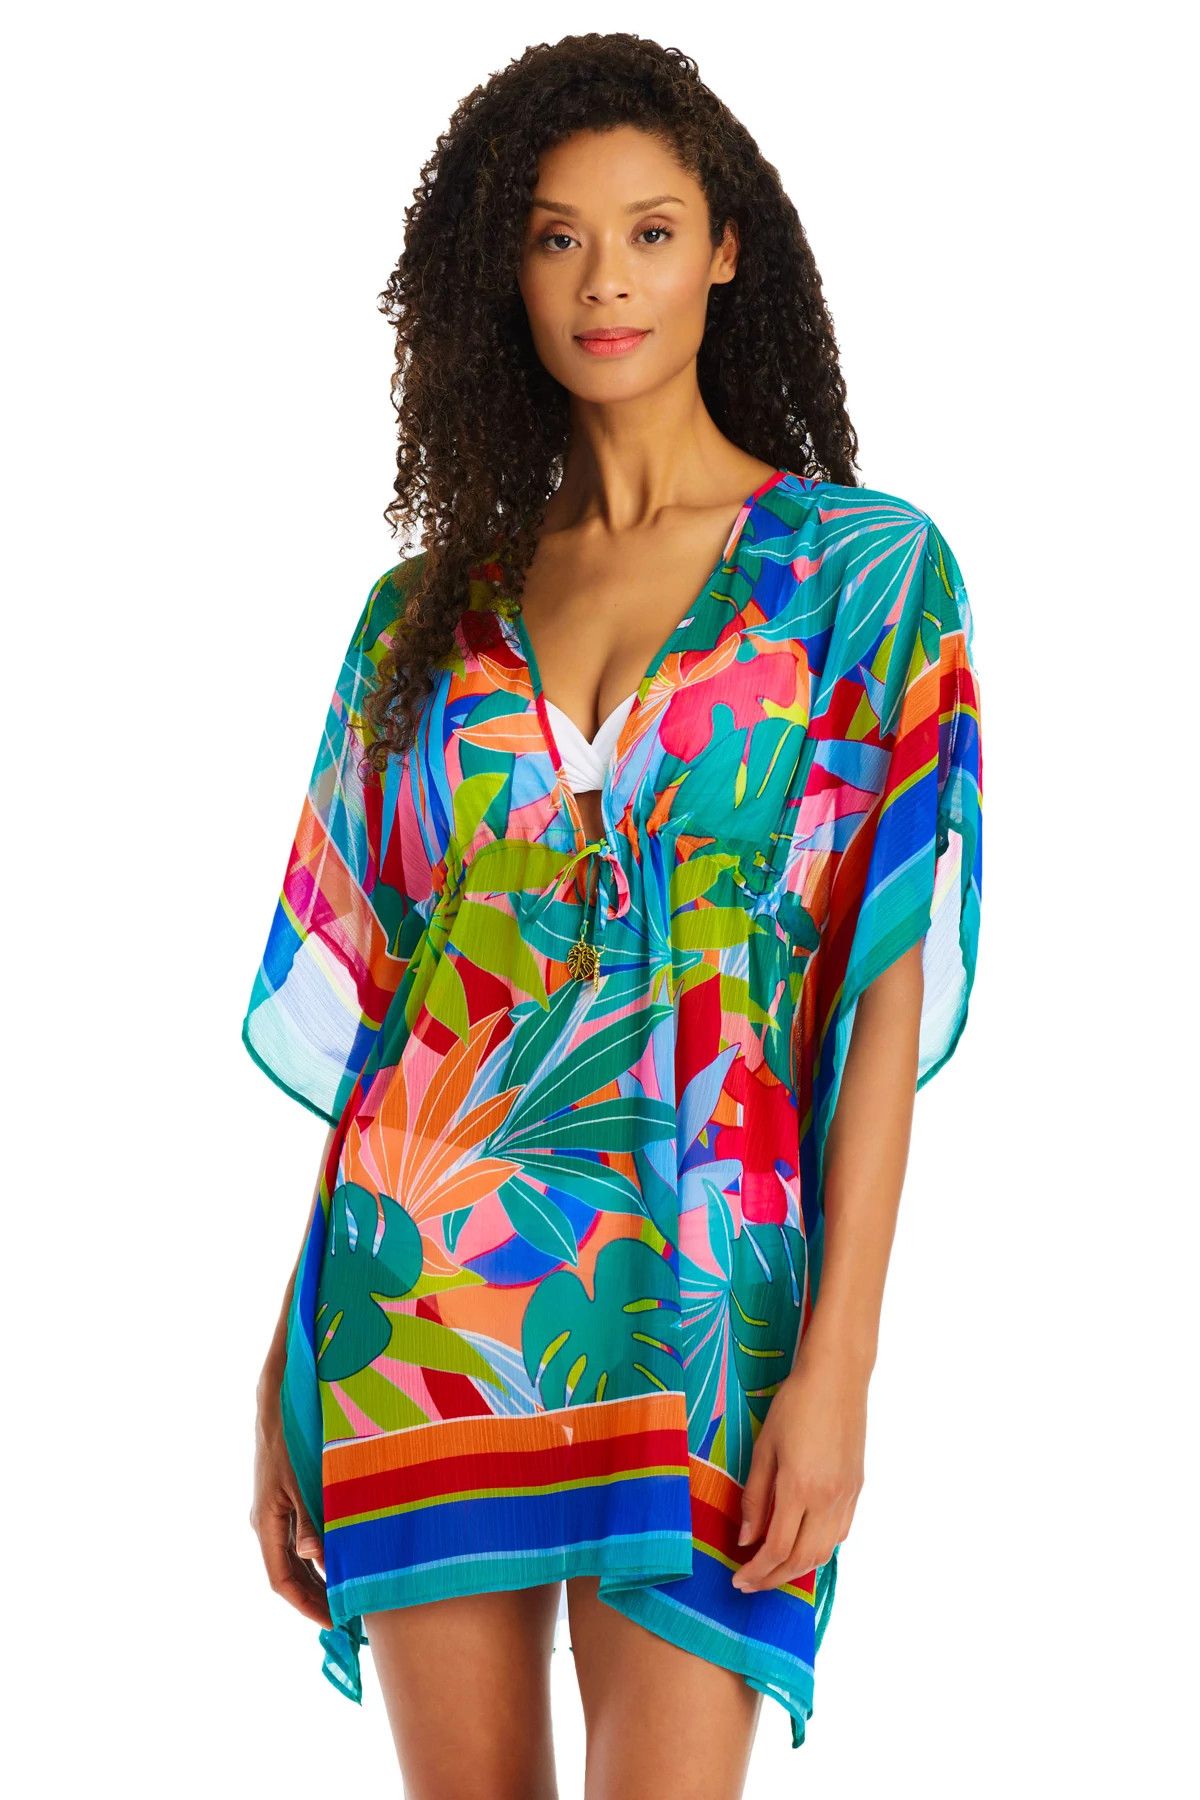 Life of the Party Chiffon Tunic | Everything But Water